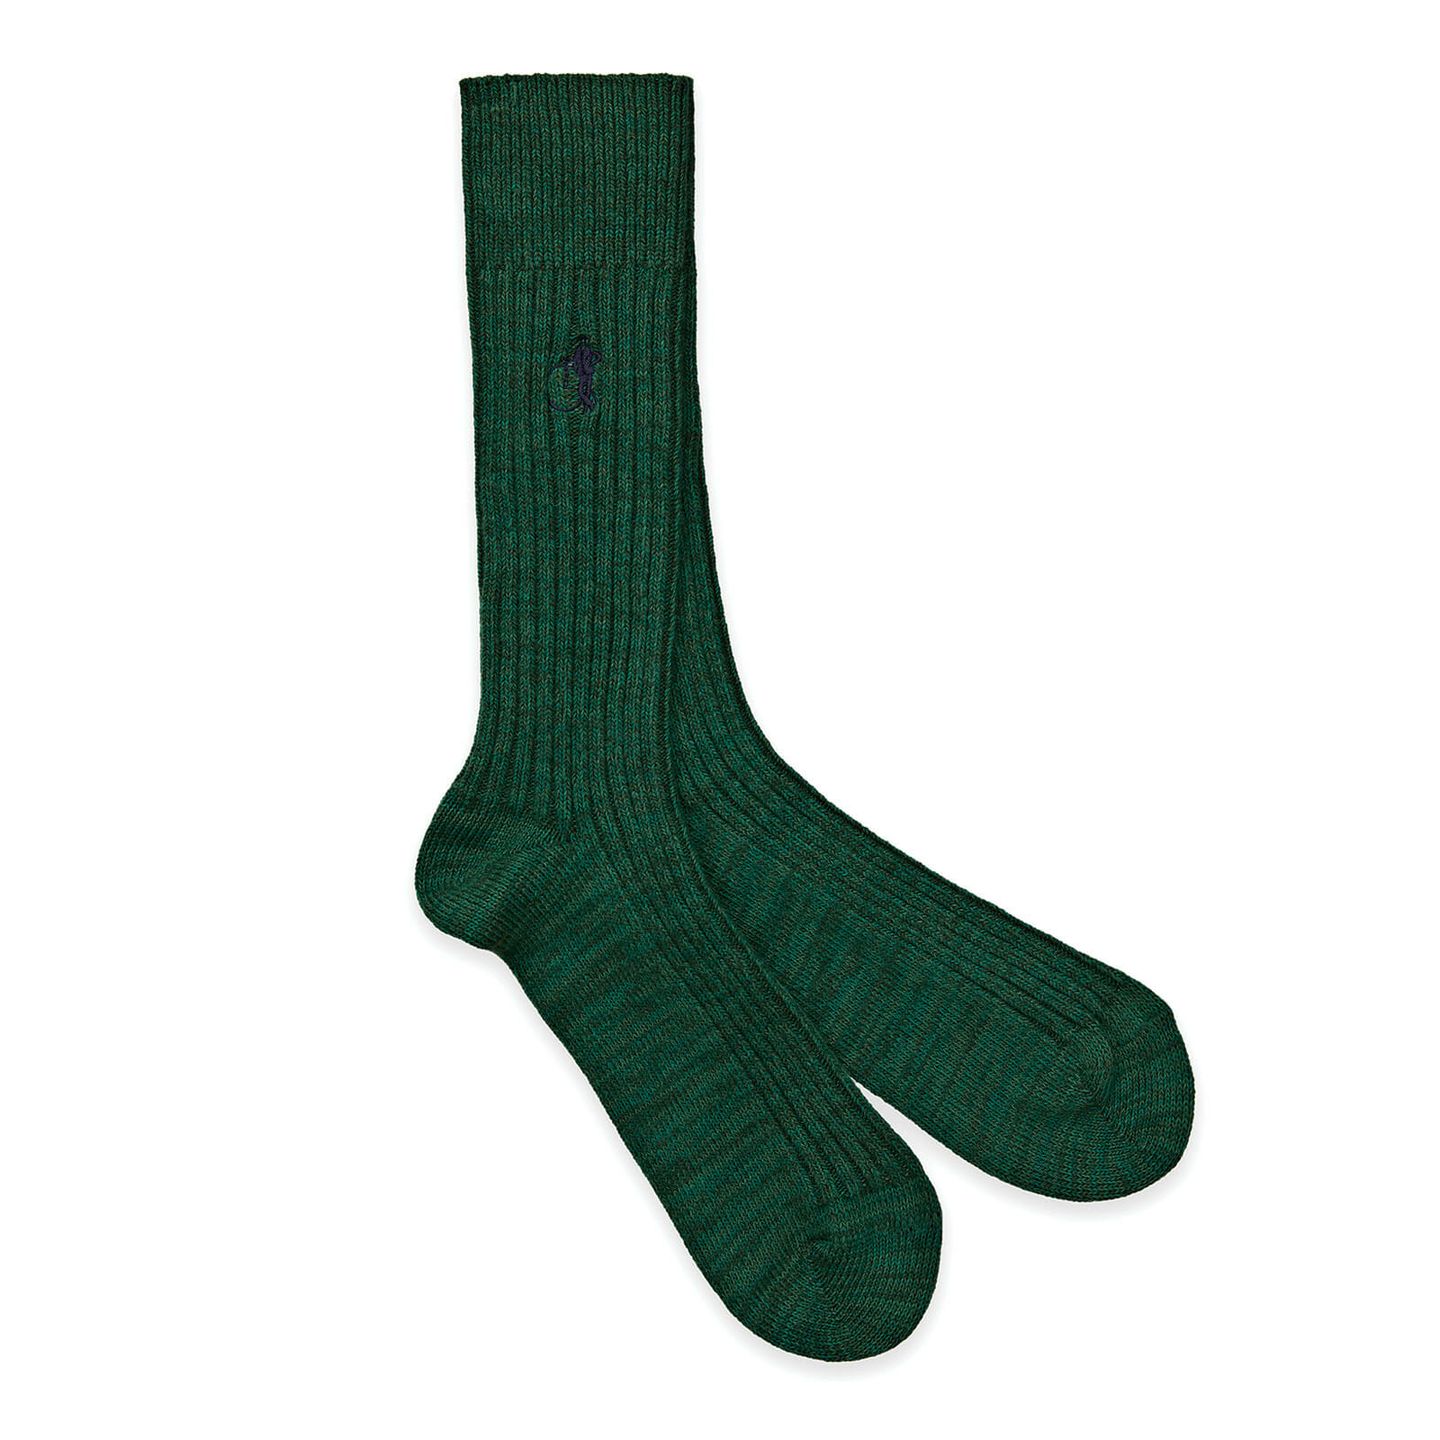 Pair of boot socks in the colour Evergreen